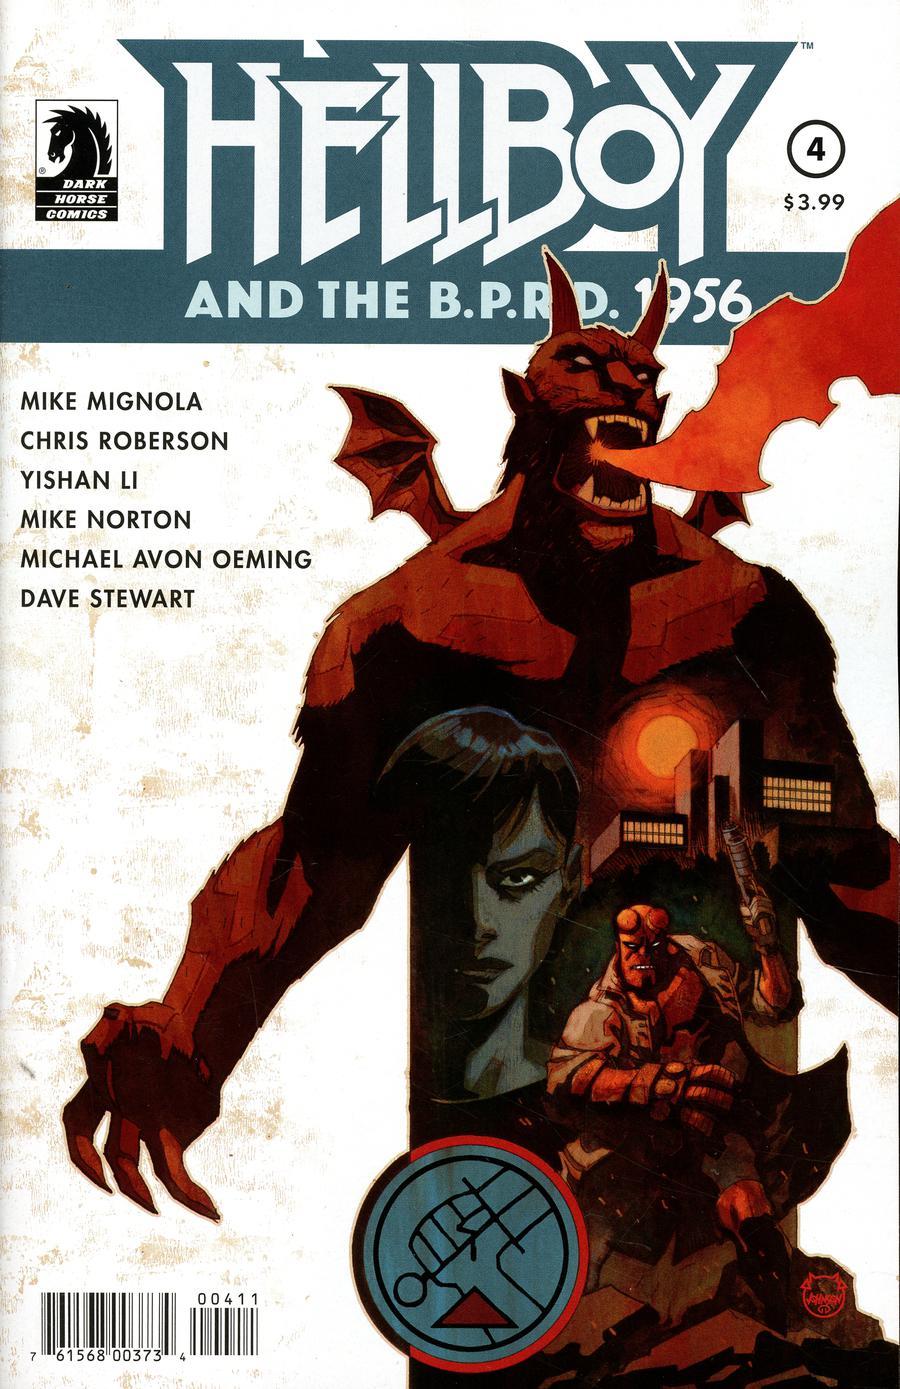 Hellboy And The BPRD 1956 Vol. 1 #4